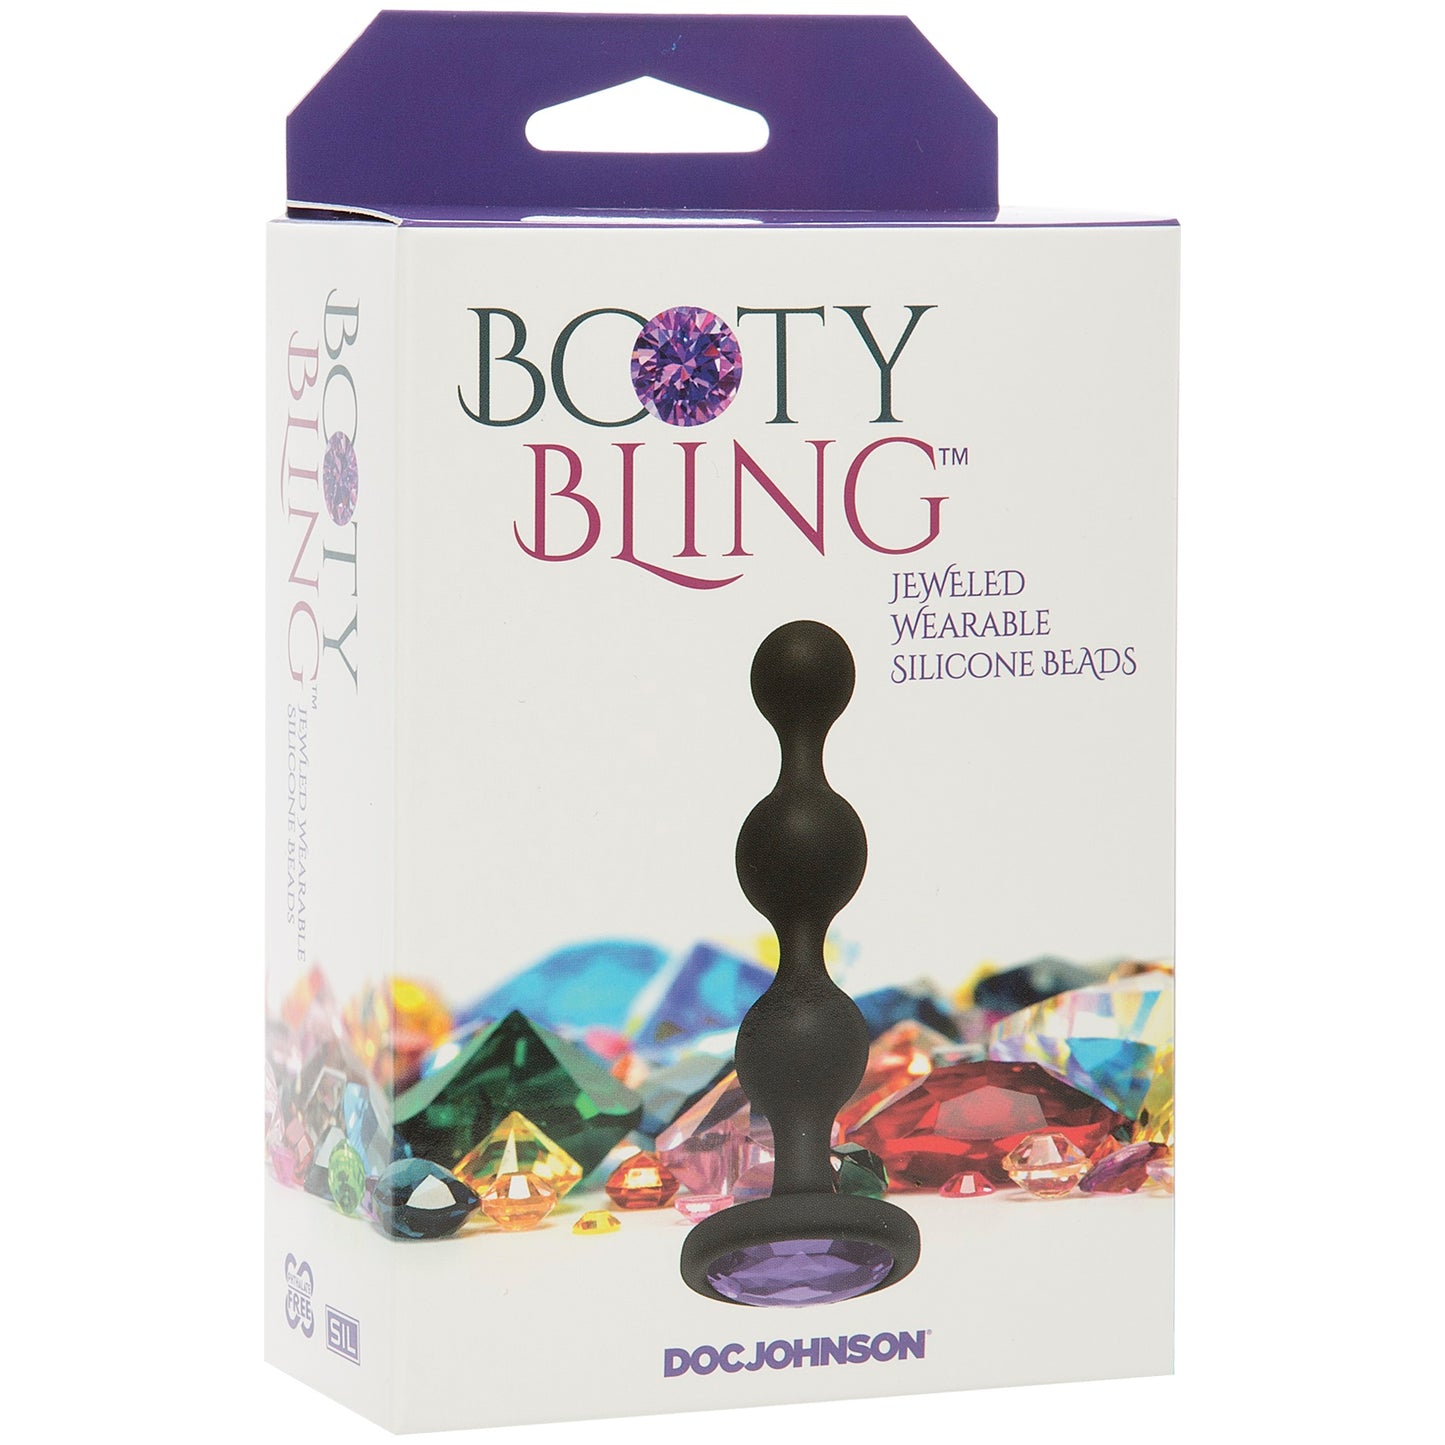 Booty Bling - Wearable Silicone Beads